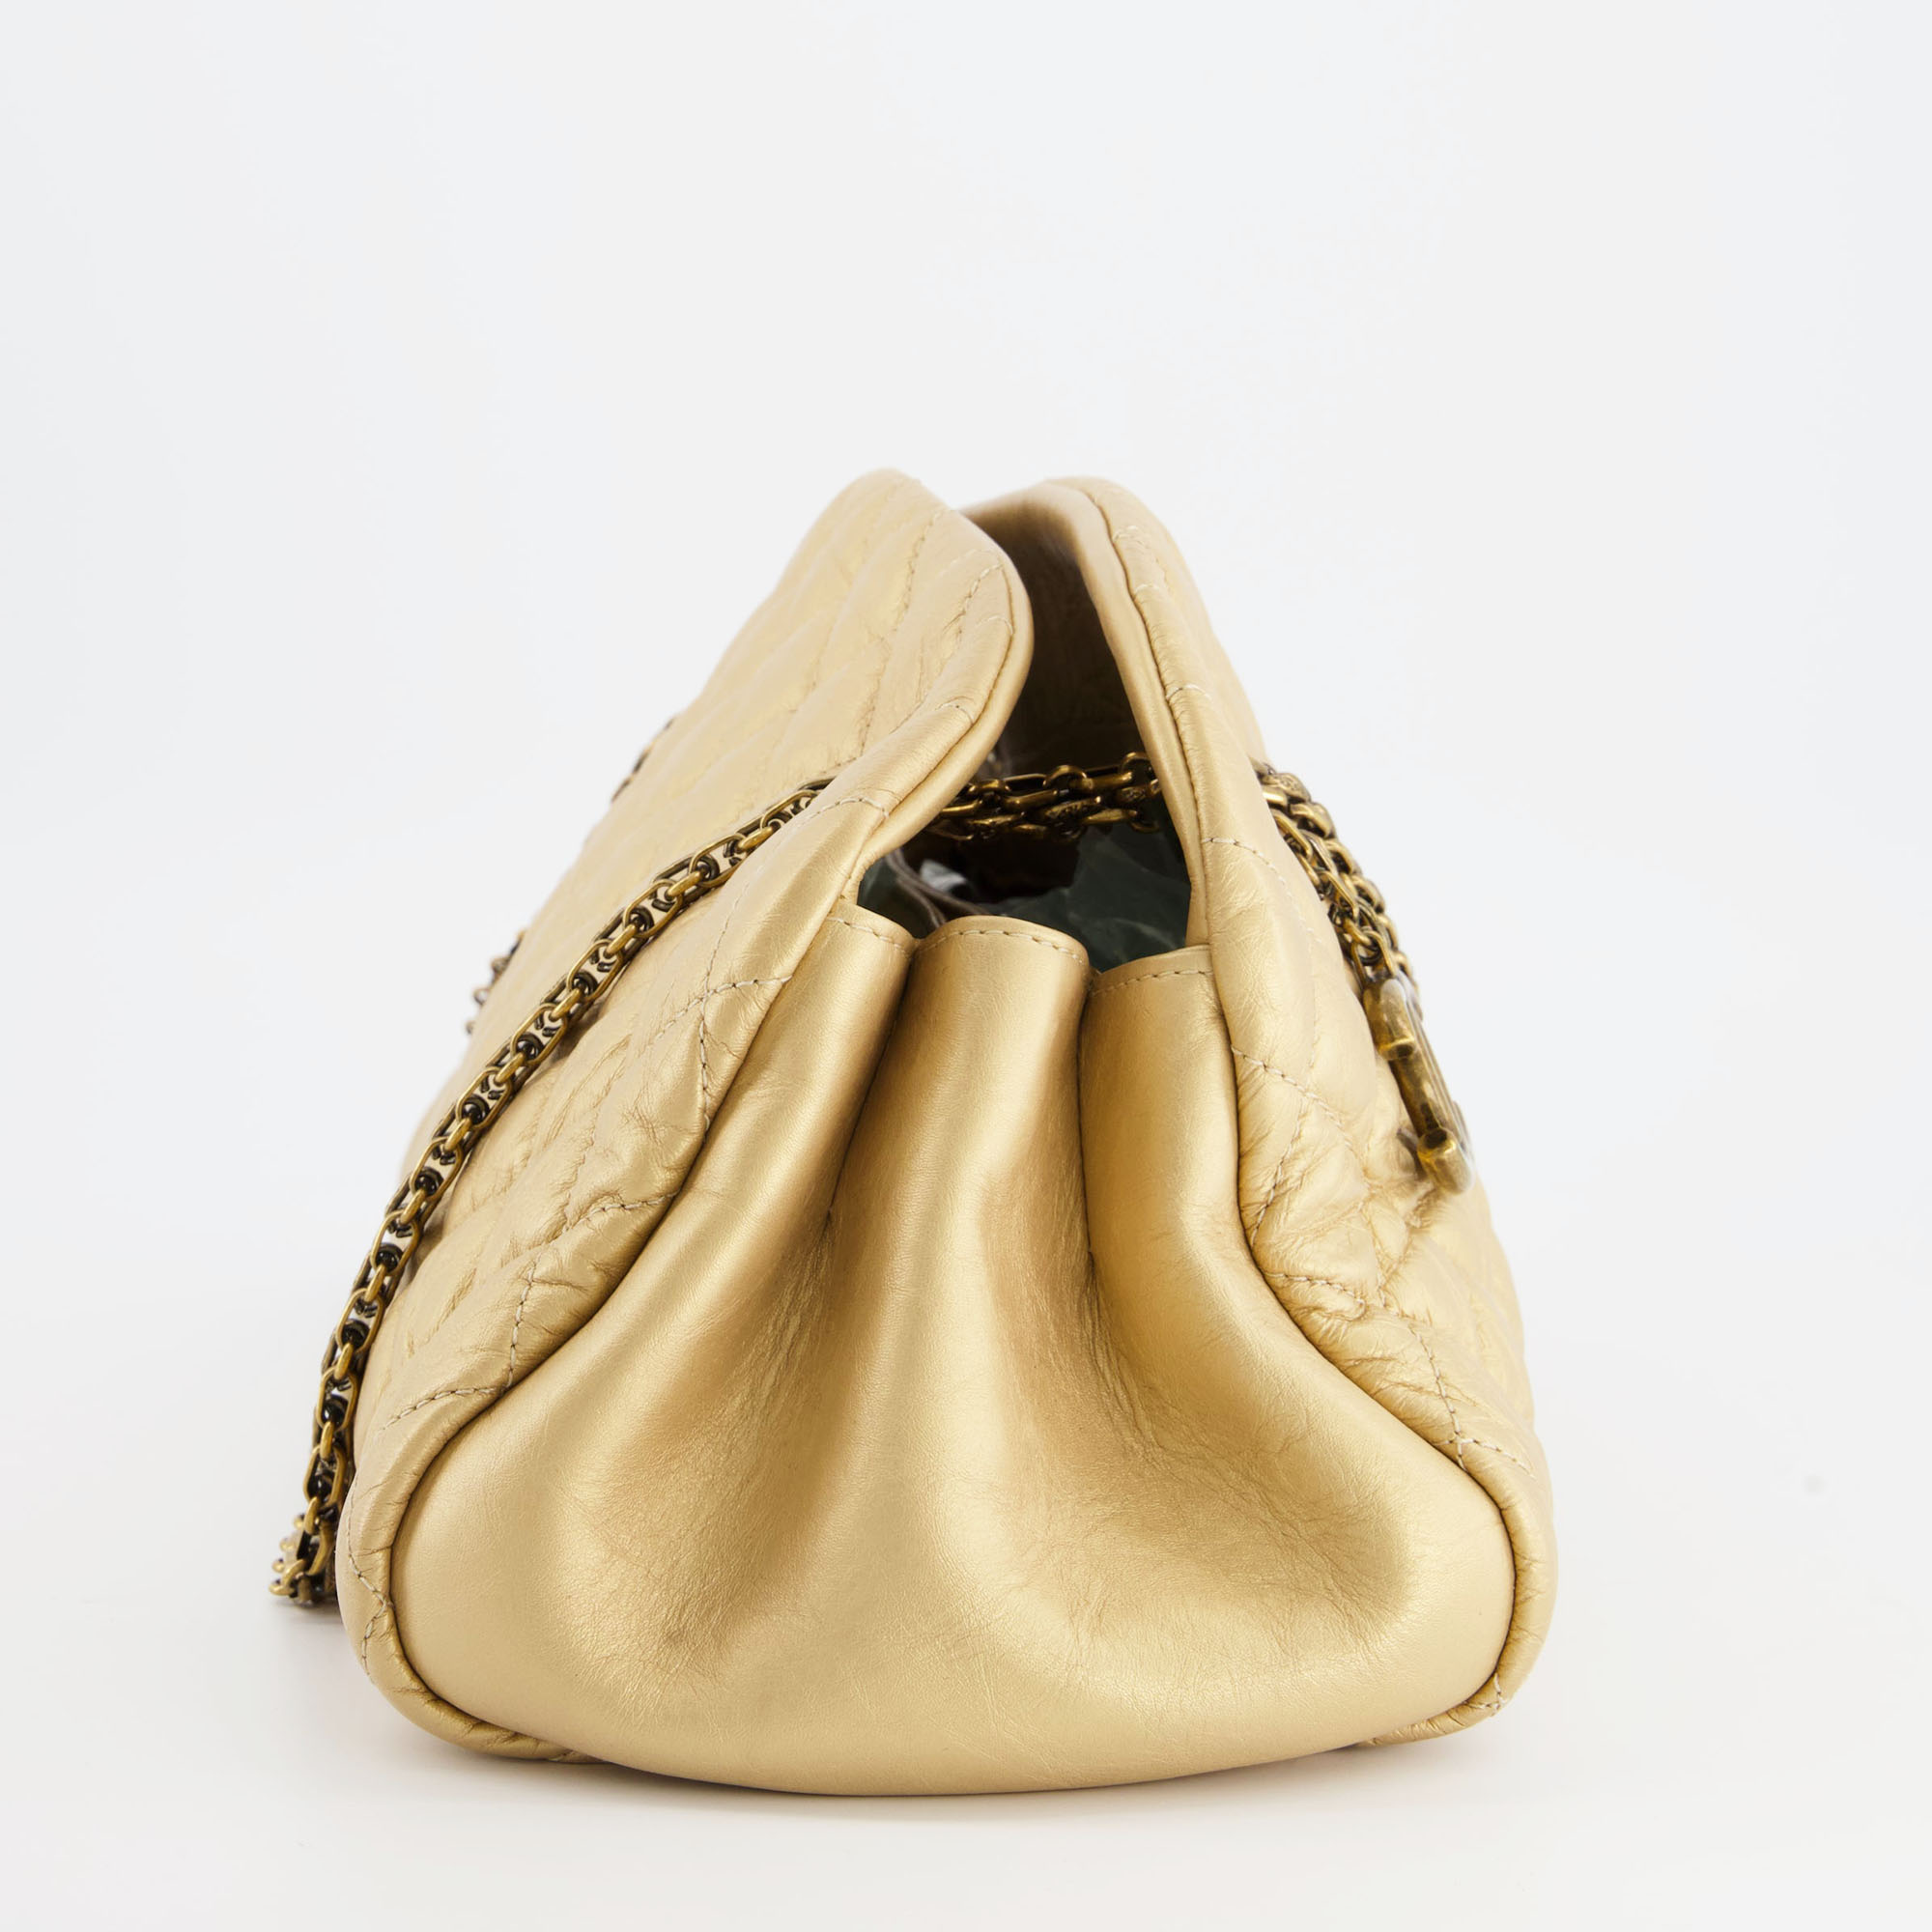 Chanel Metallic Gold Bowling Bag In Aged Calfskin With Antique Gold Hardware